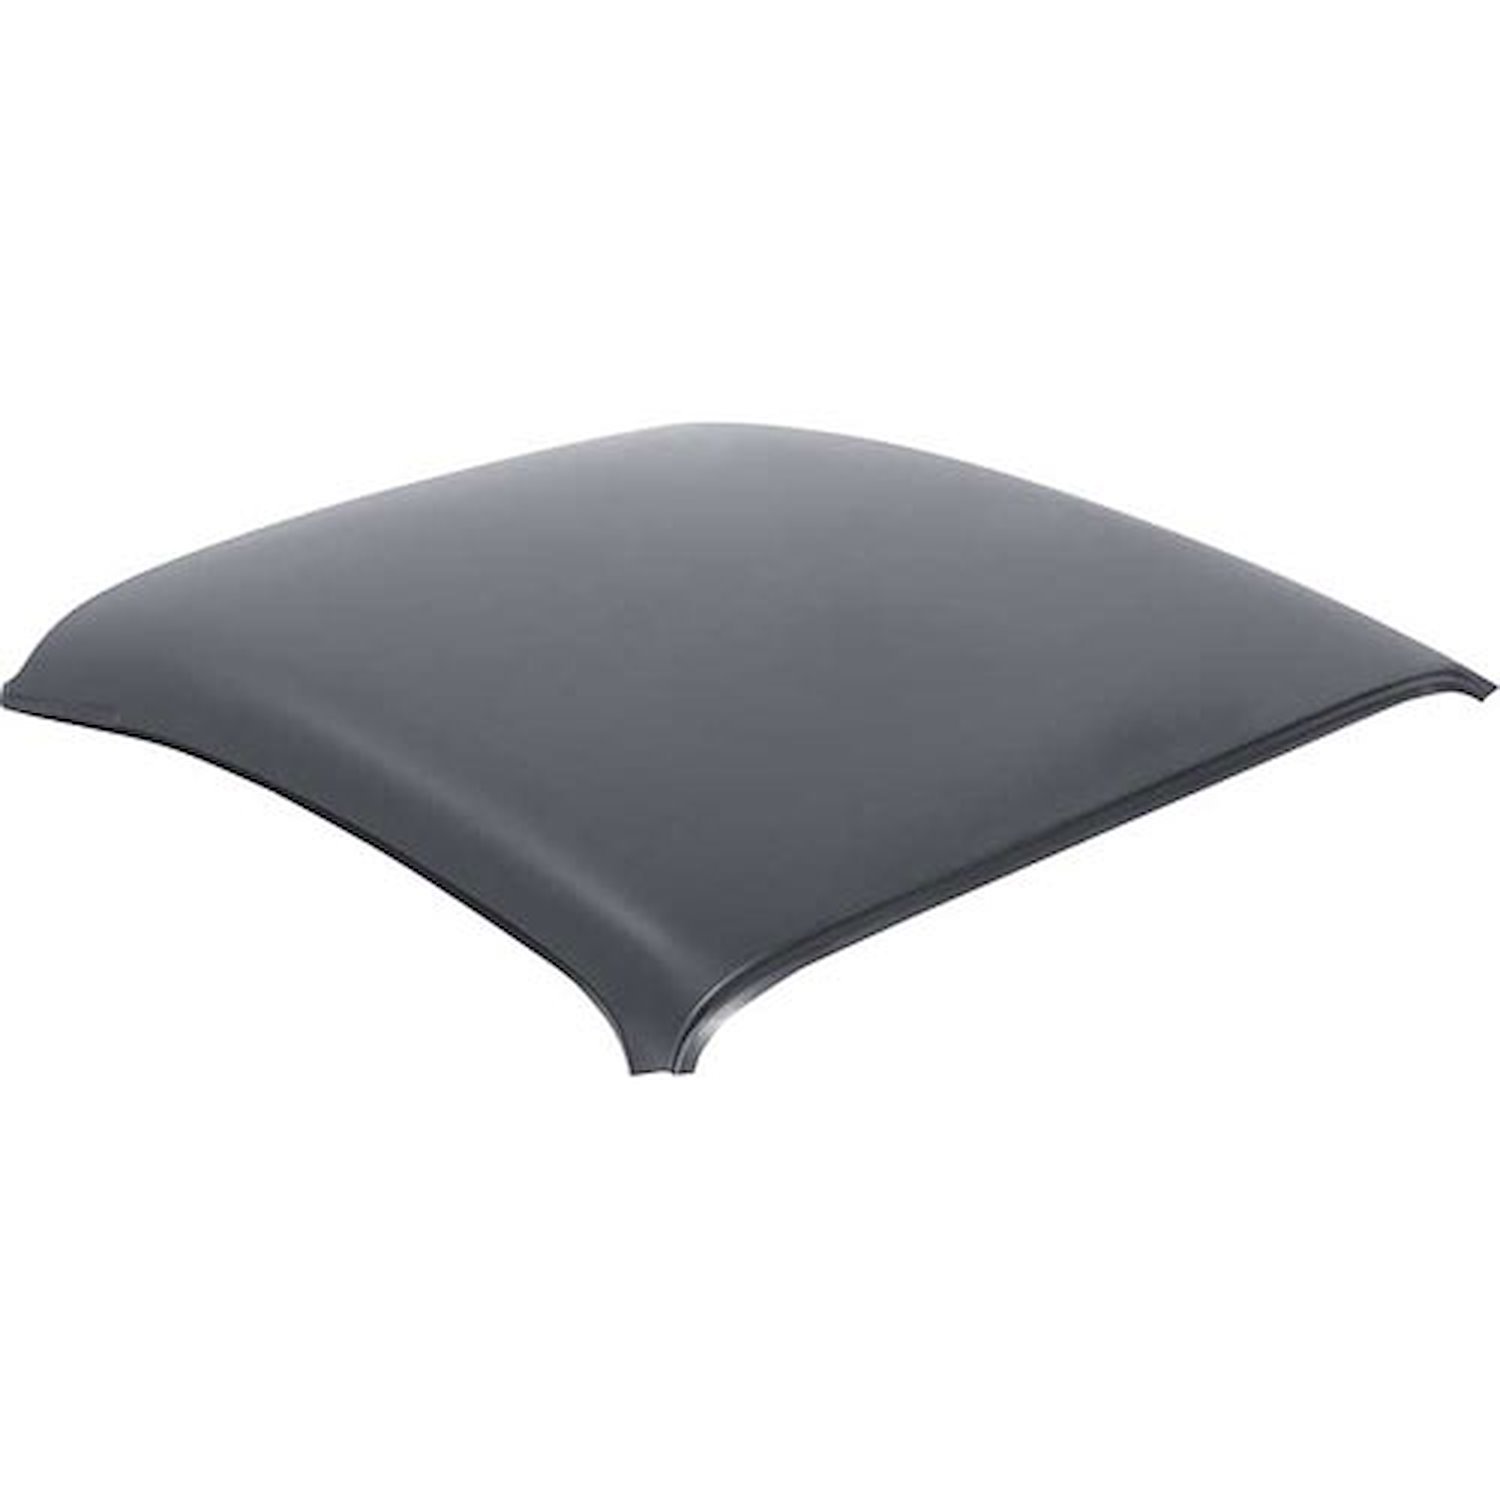 E384 Roof Panel Replacement Skin for 1970-1974 GM